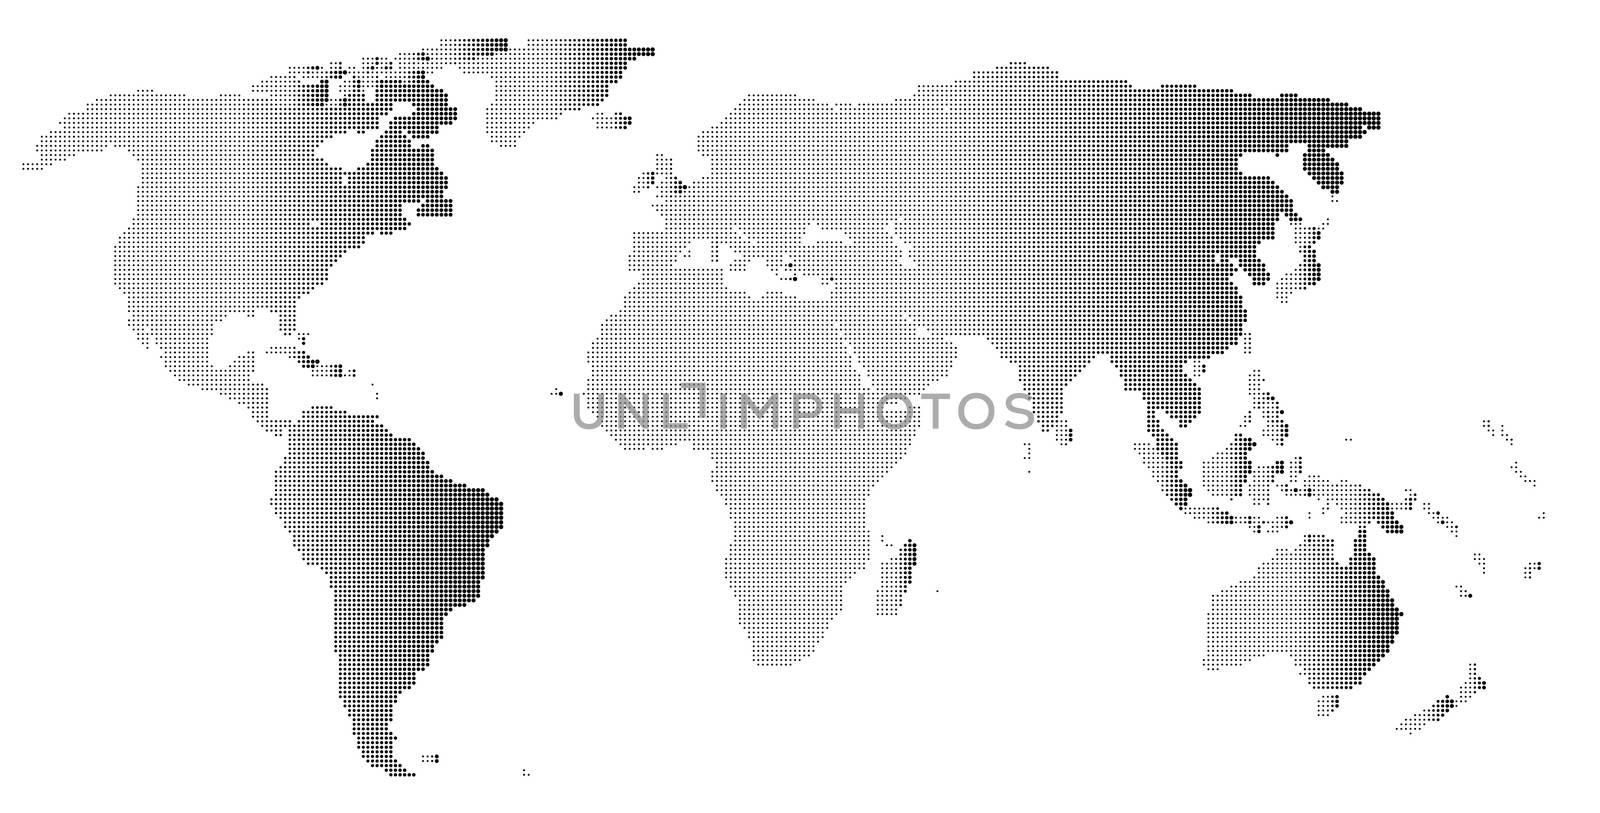 A map of the world in black and white